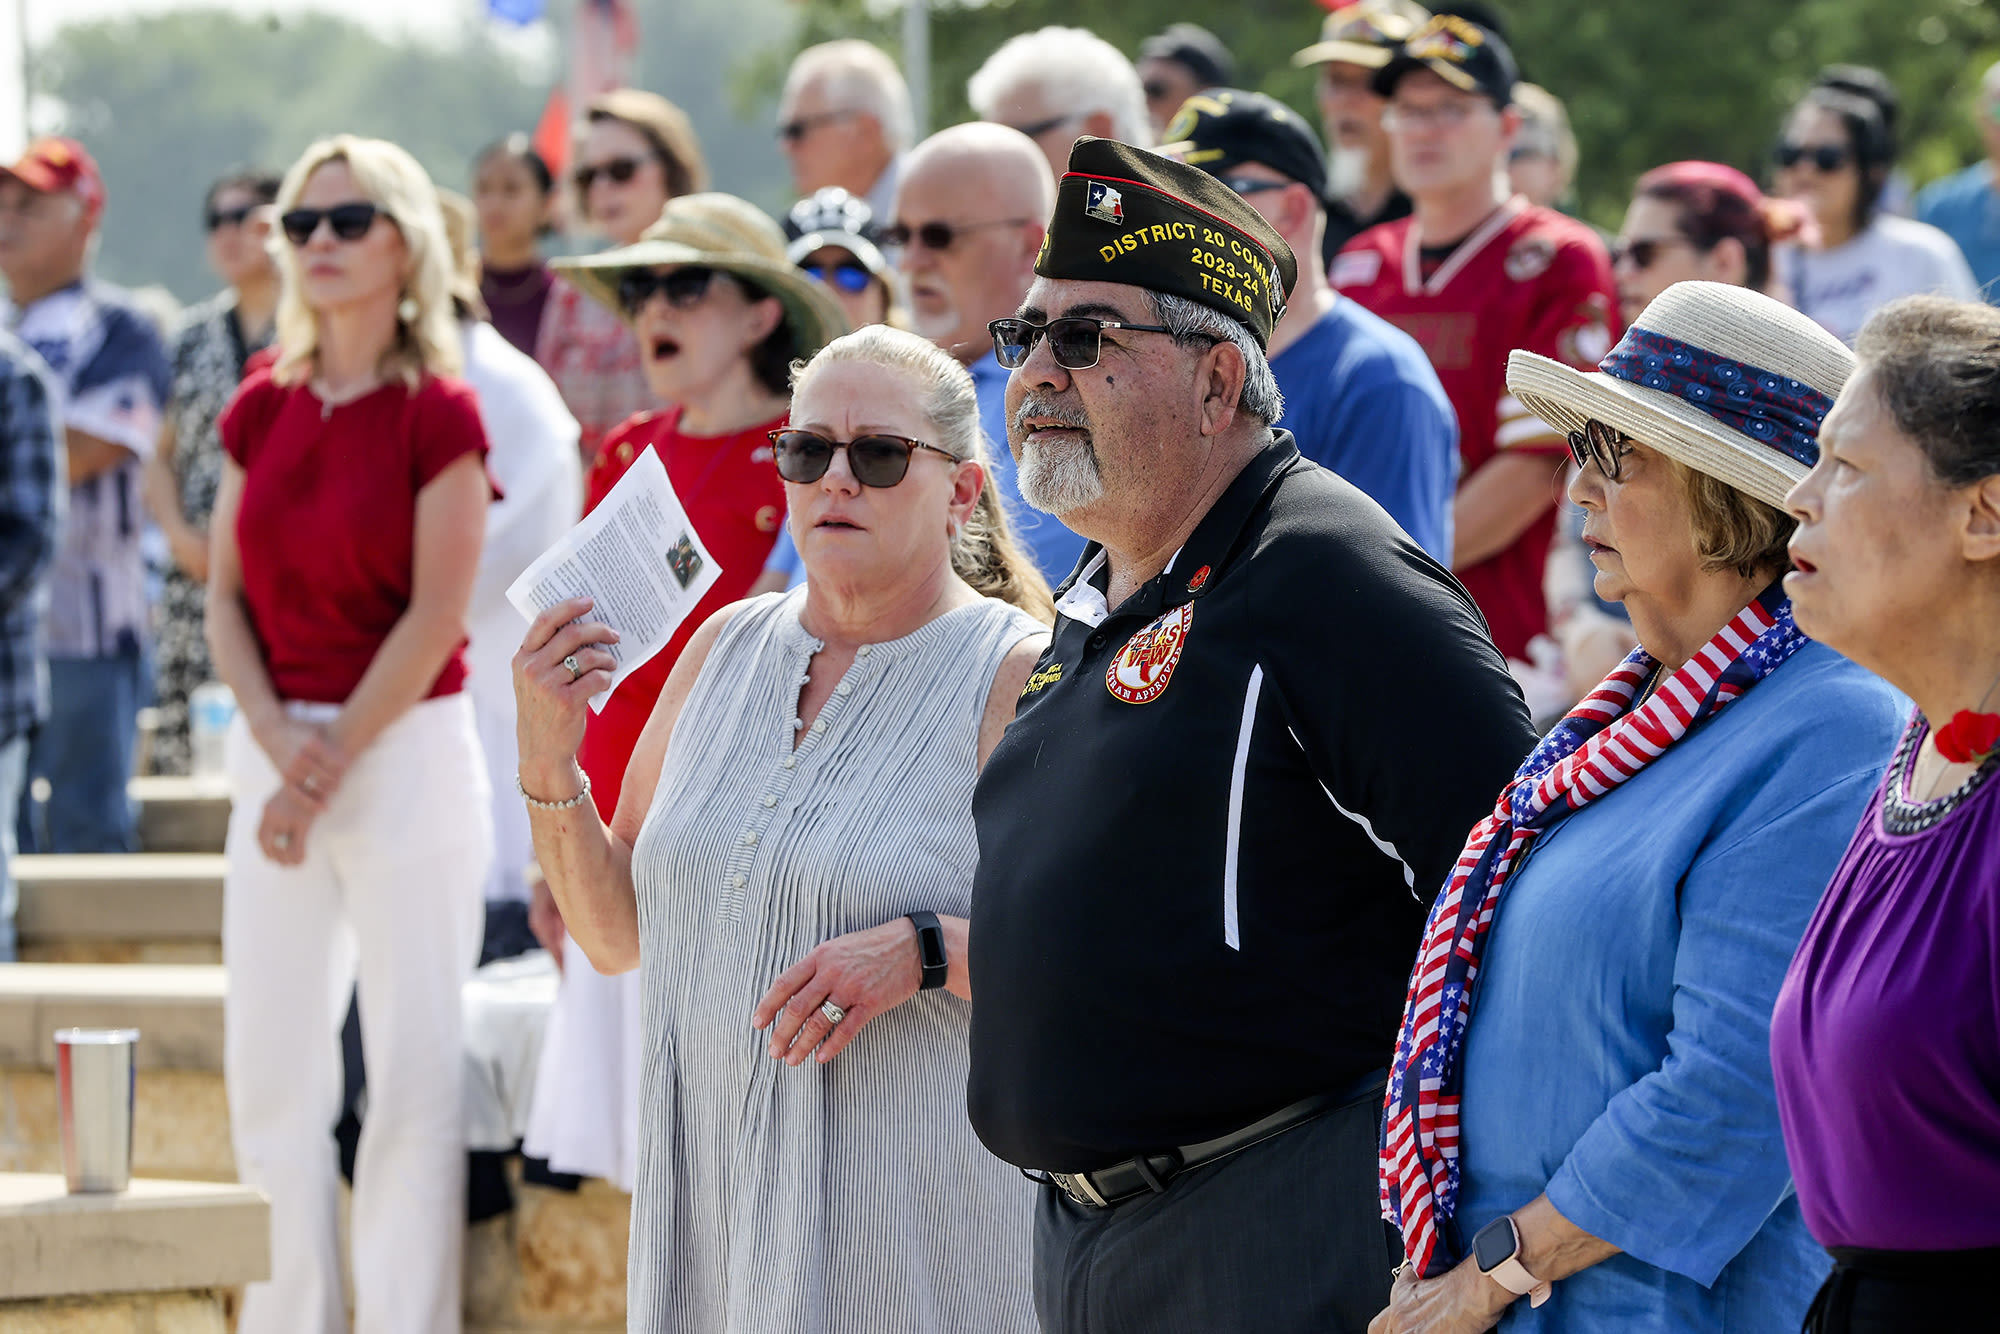 Texas middle of the pack for military retirees, says report